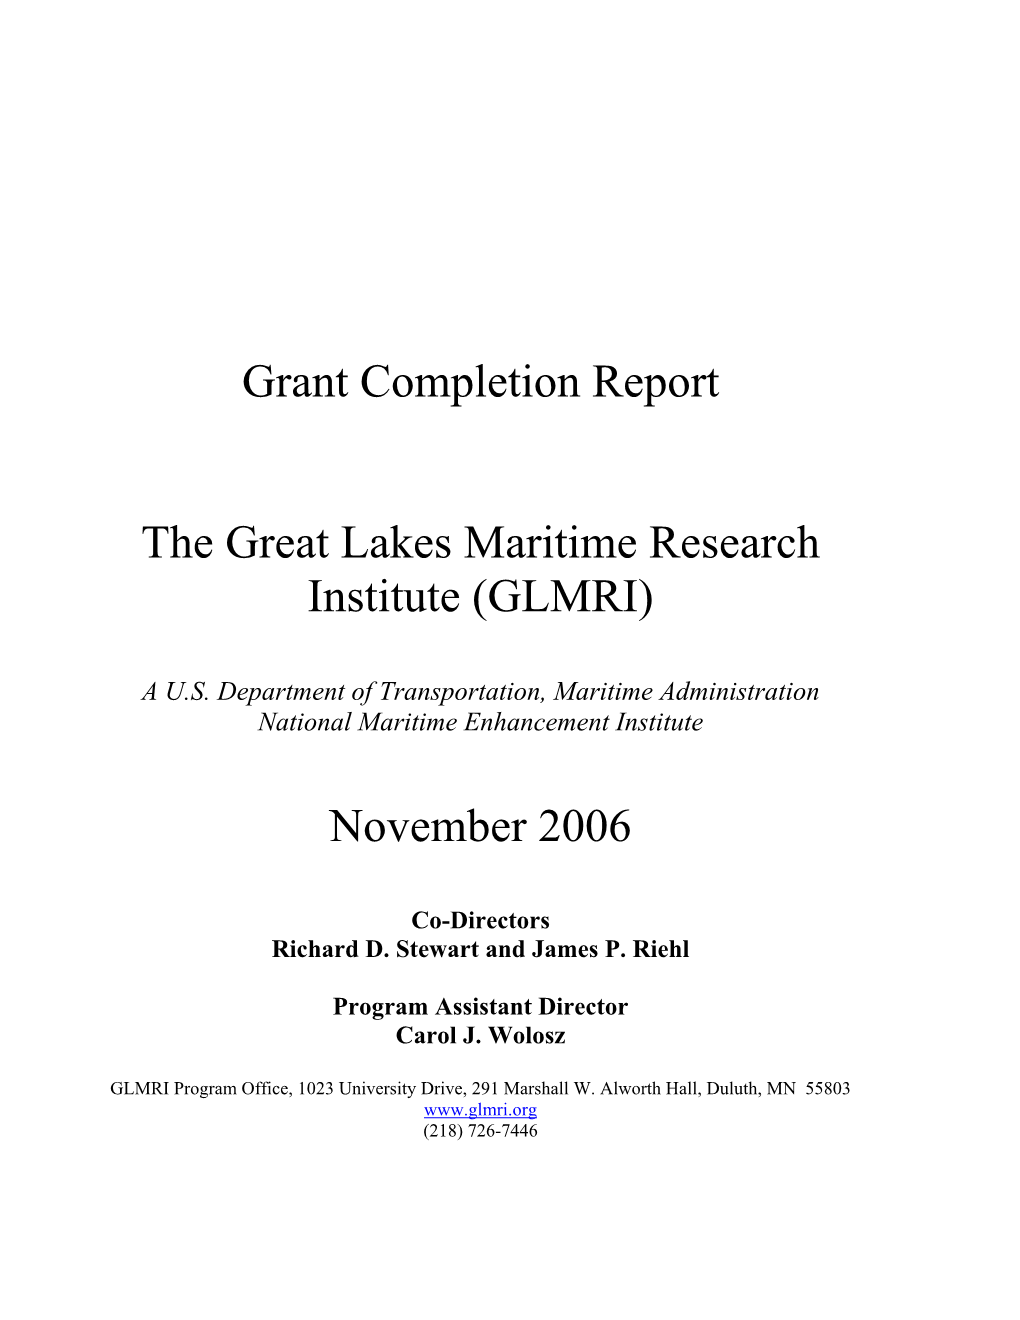 GLMRI End of Grant Report (May 2005